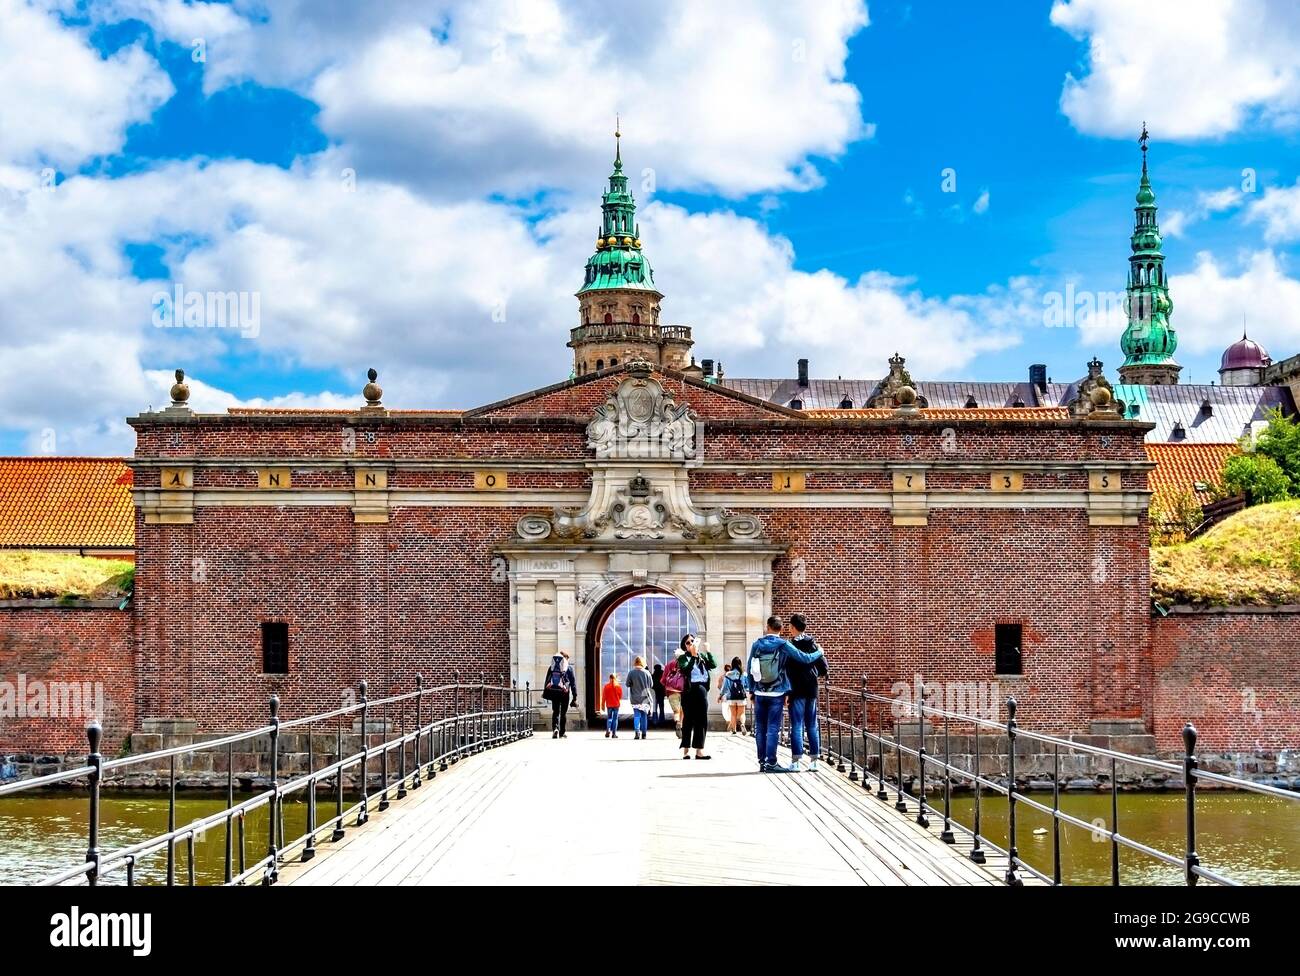 The entrance of of the castle of Kronborg, built in 15th century. UNESCO World Heritage Site. It's Elsinore in William Shakespeare's Hamlet. Stock Photo